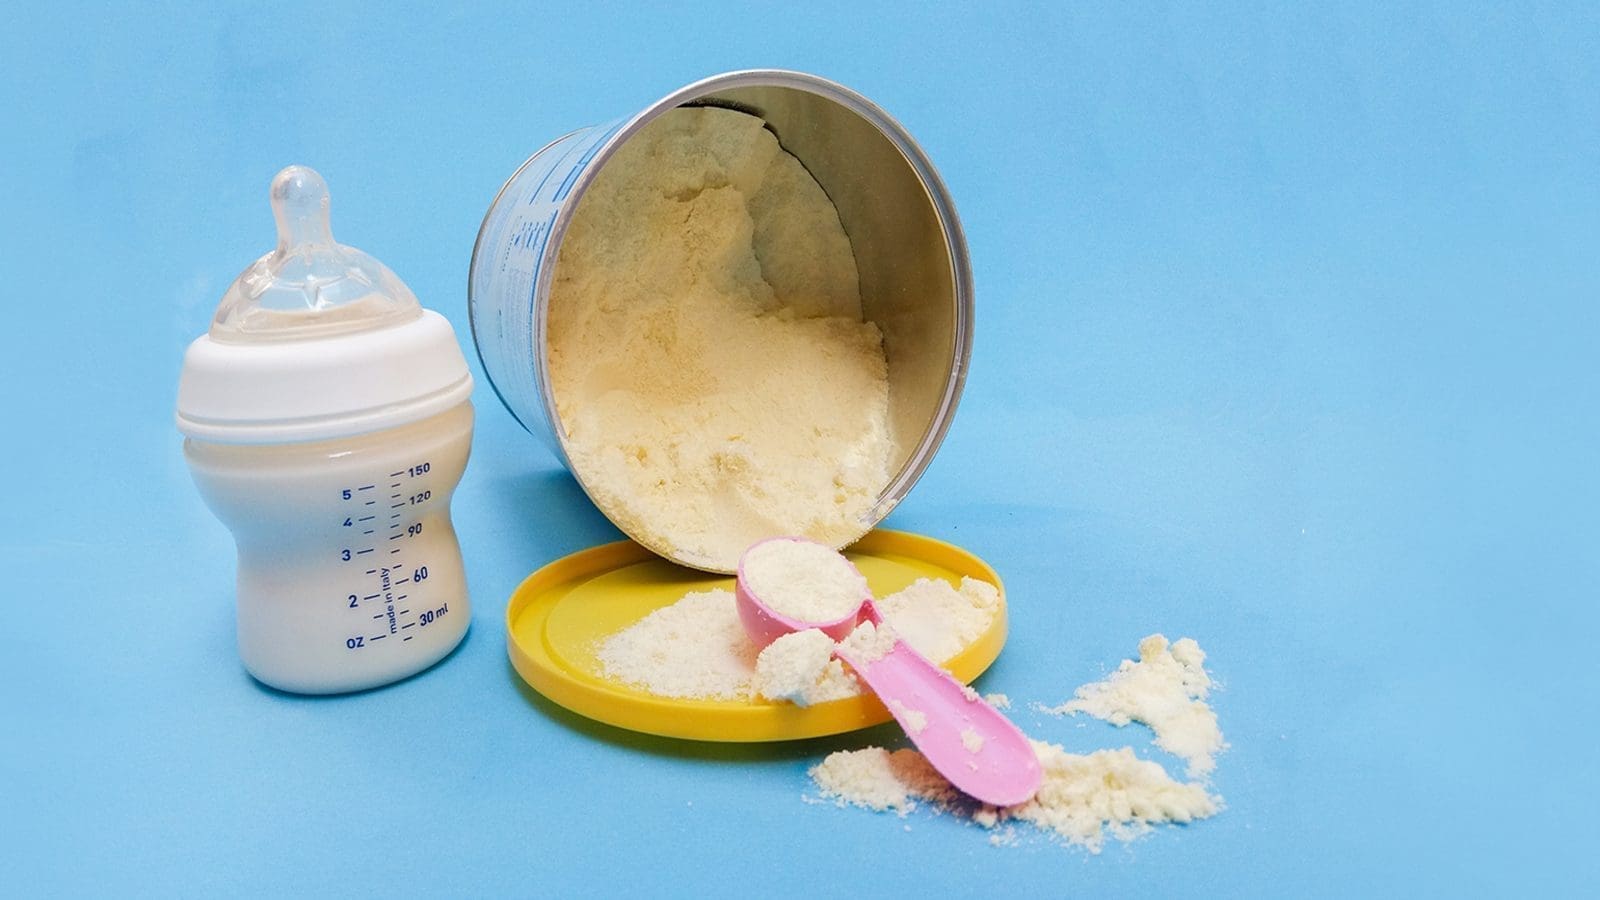 Nestlé to end marketing of infant formula for babies up to six months of age globally in 2023